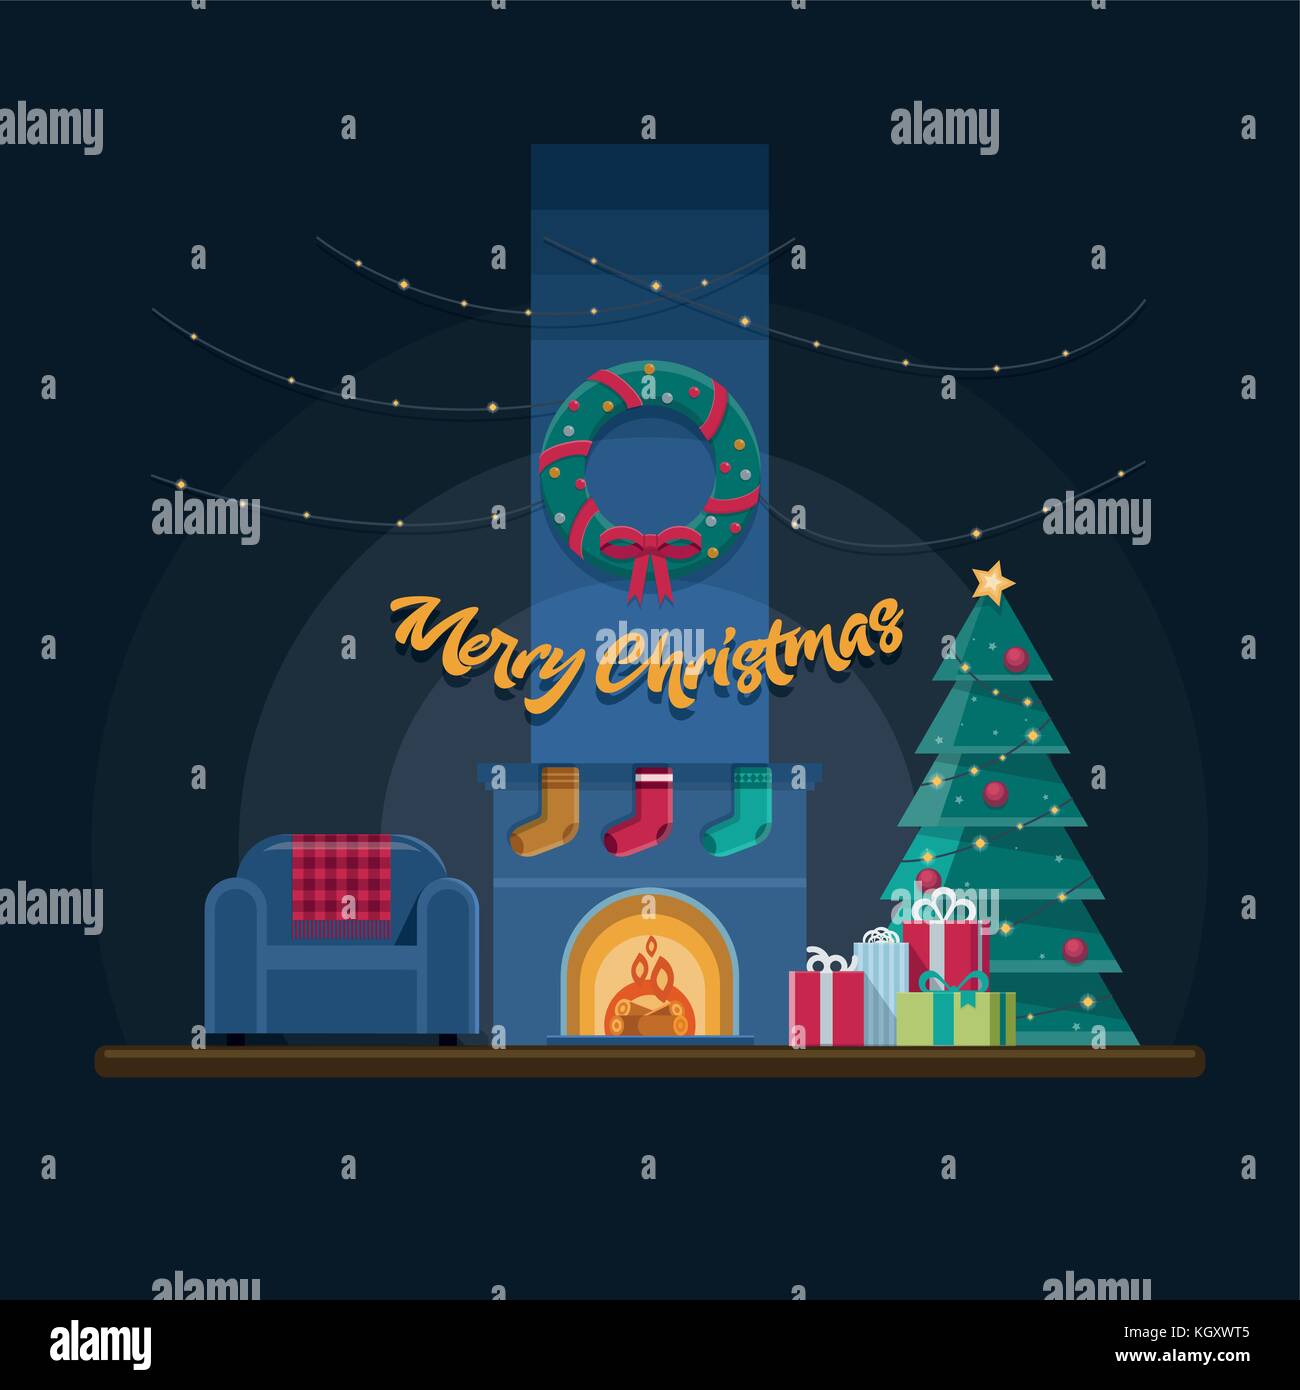 Dark Christmas living room with fireplace, armchair, lights, xmas tree, presents and decoration. Elements are layered separately in vector file. Stock Vector